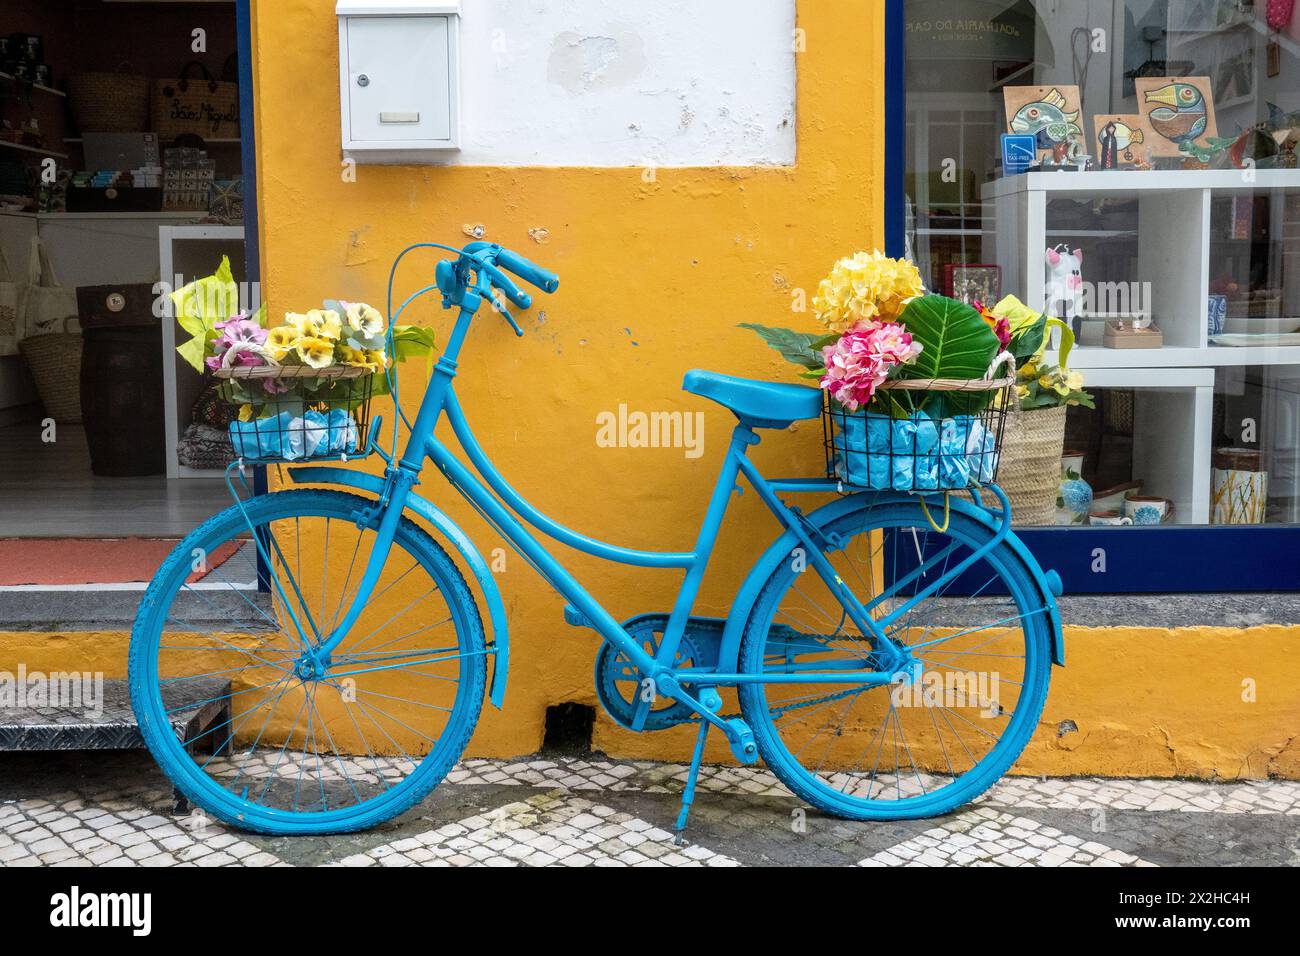 Traditional Painted Blue Bicycle With Carrier Baskets Used As A Display Outside A Retail Shop In Ponta Delgada, The Azores, Portugal, April 13, 2024 Stock Photo